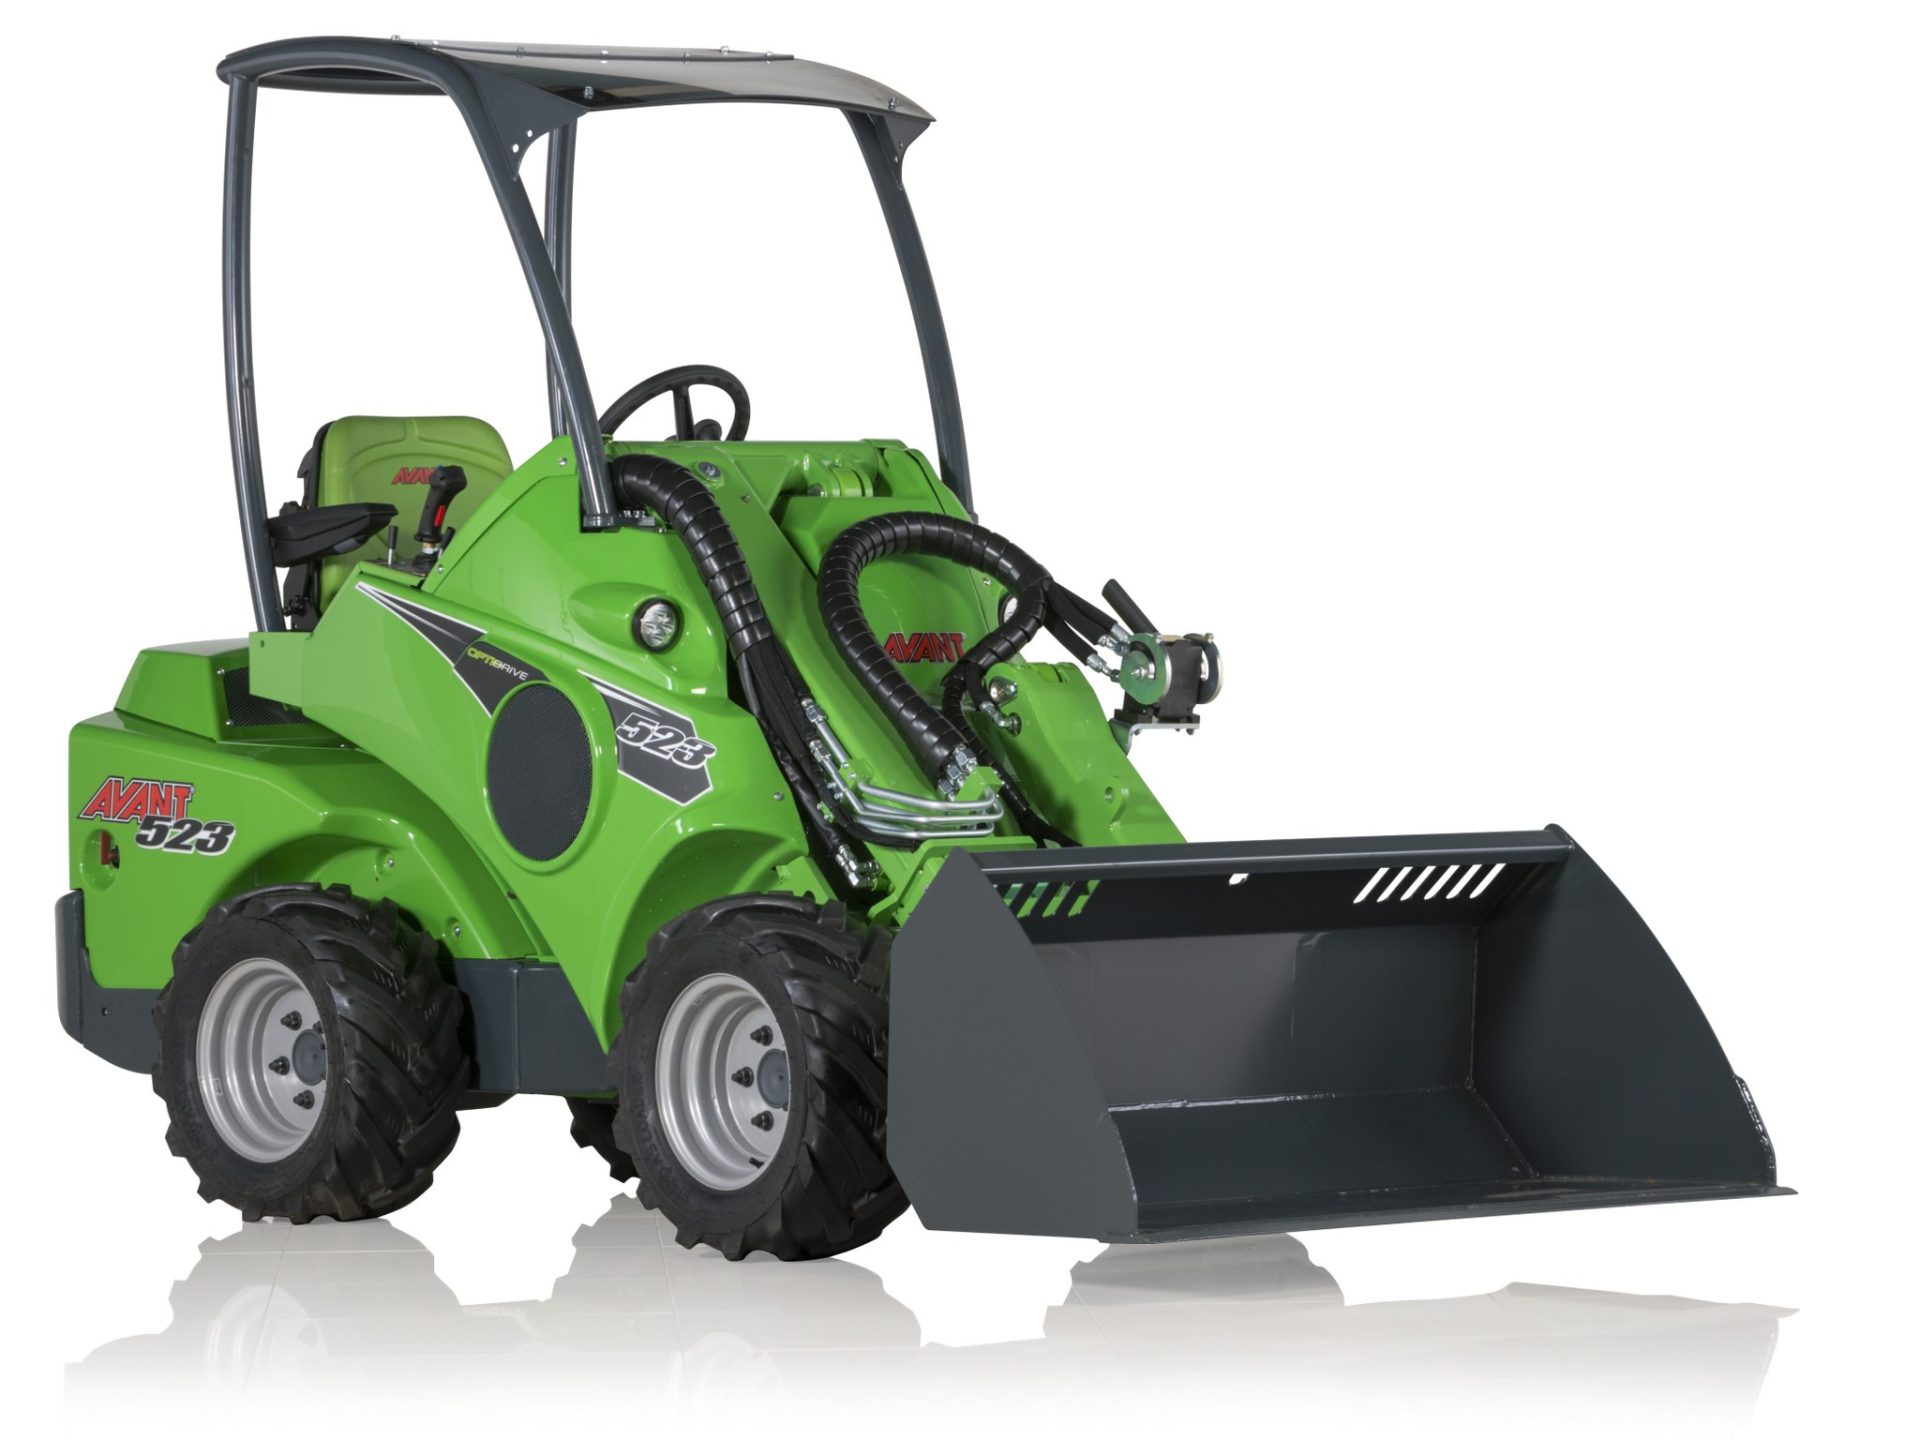 Green Avant 523 Multi-Functional Loader front right view stock image on white background with drop shadow